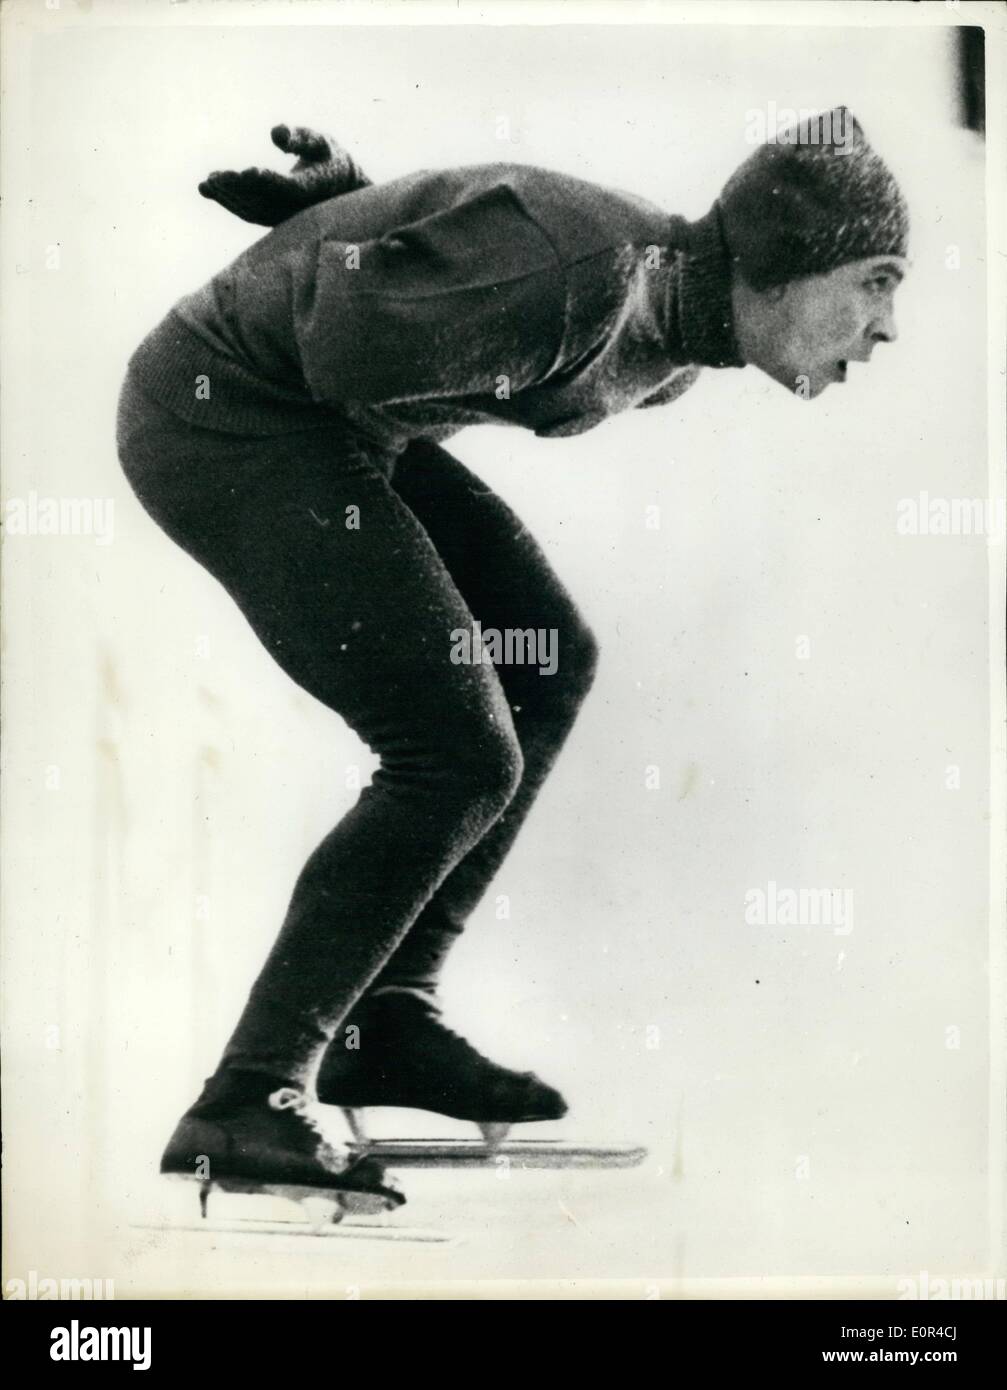 Feb. 02, 1958 - One-Armed-Russian-Skater Wins Silver Medal in Helsinki: V. Shilikovski, of Russia, who has only one arm - seen at speed during the World skating championship in Helsinki on Sunday, when he came second and won the silver medal. Stock Photo